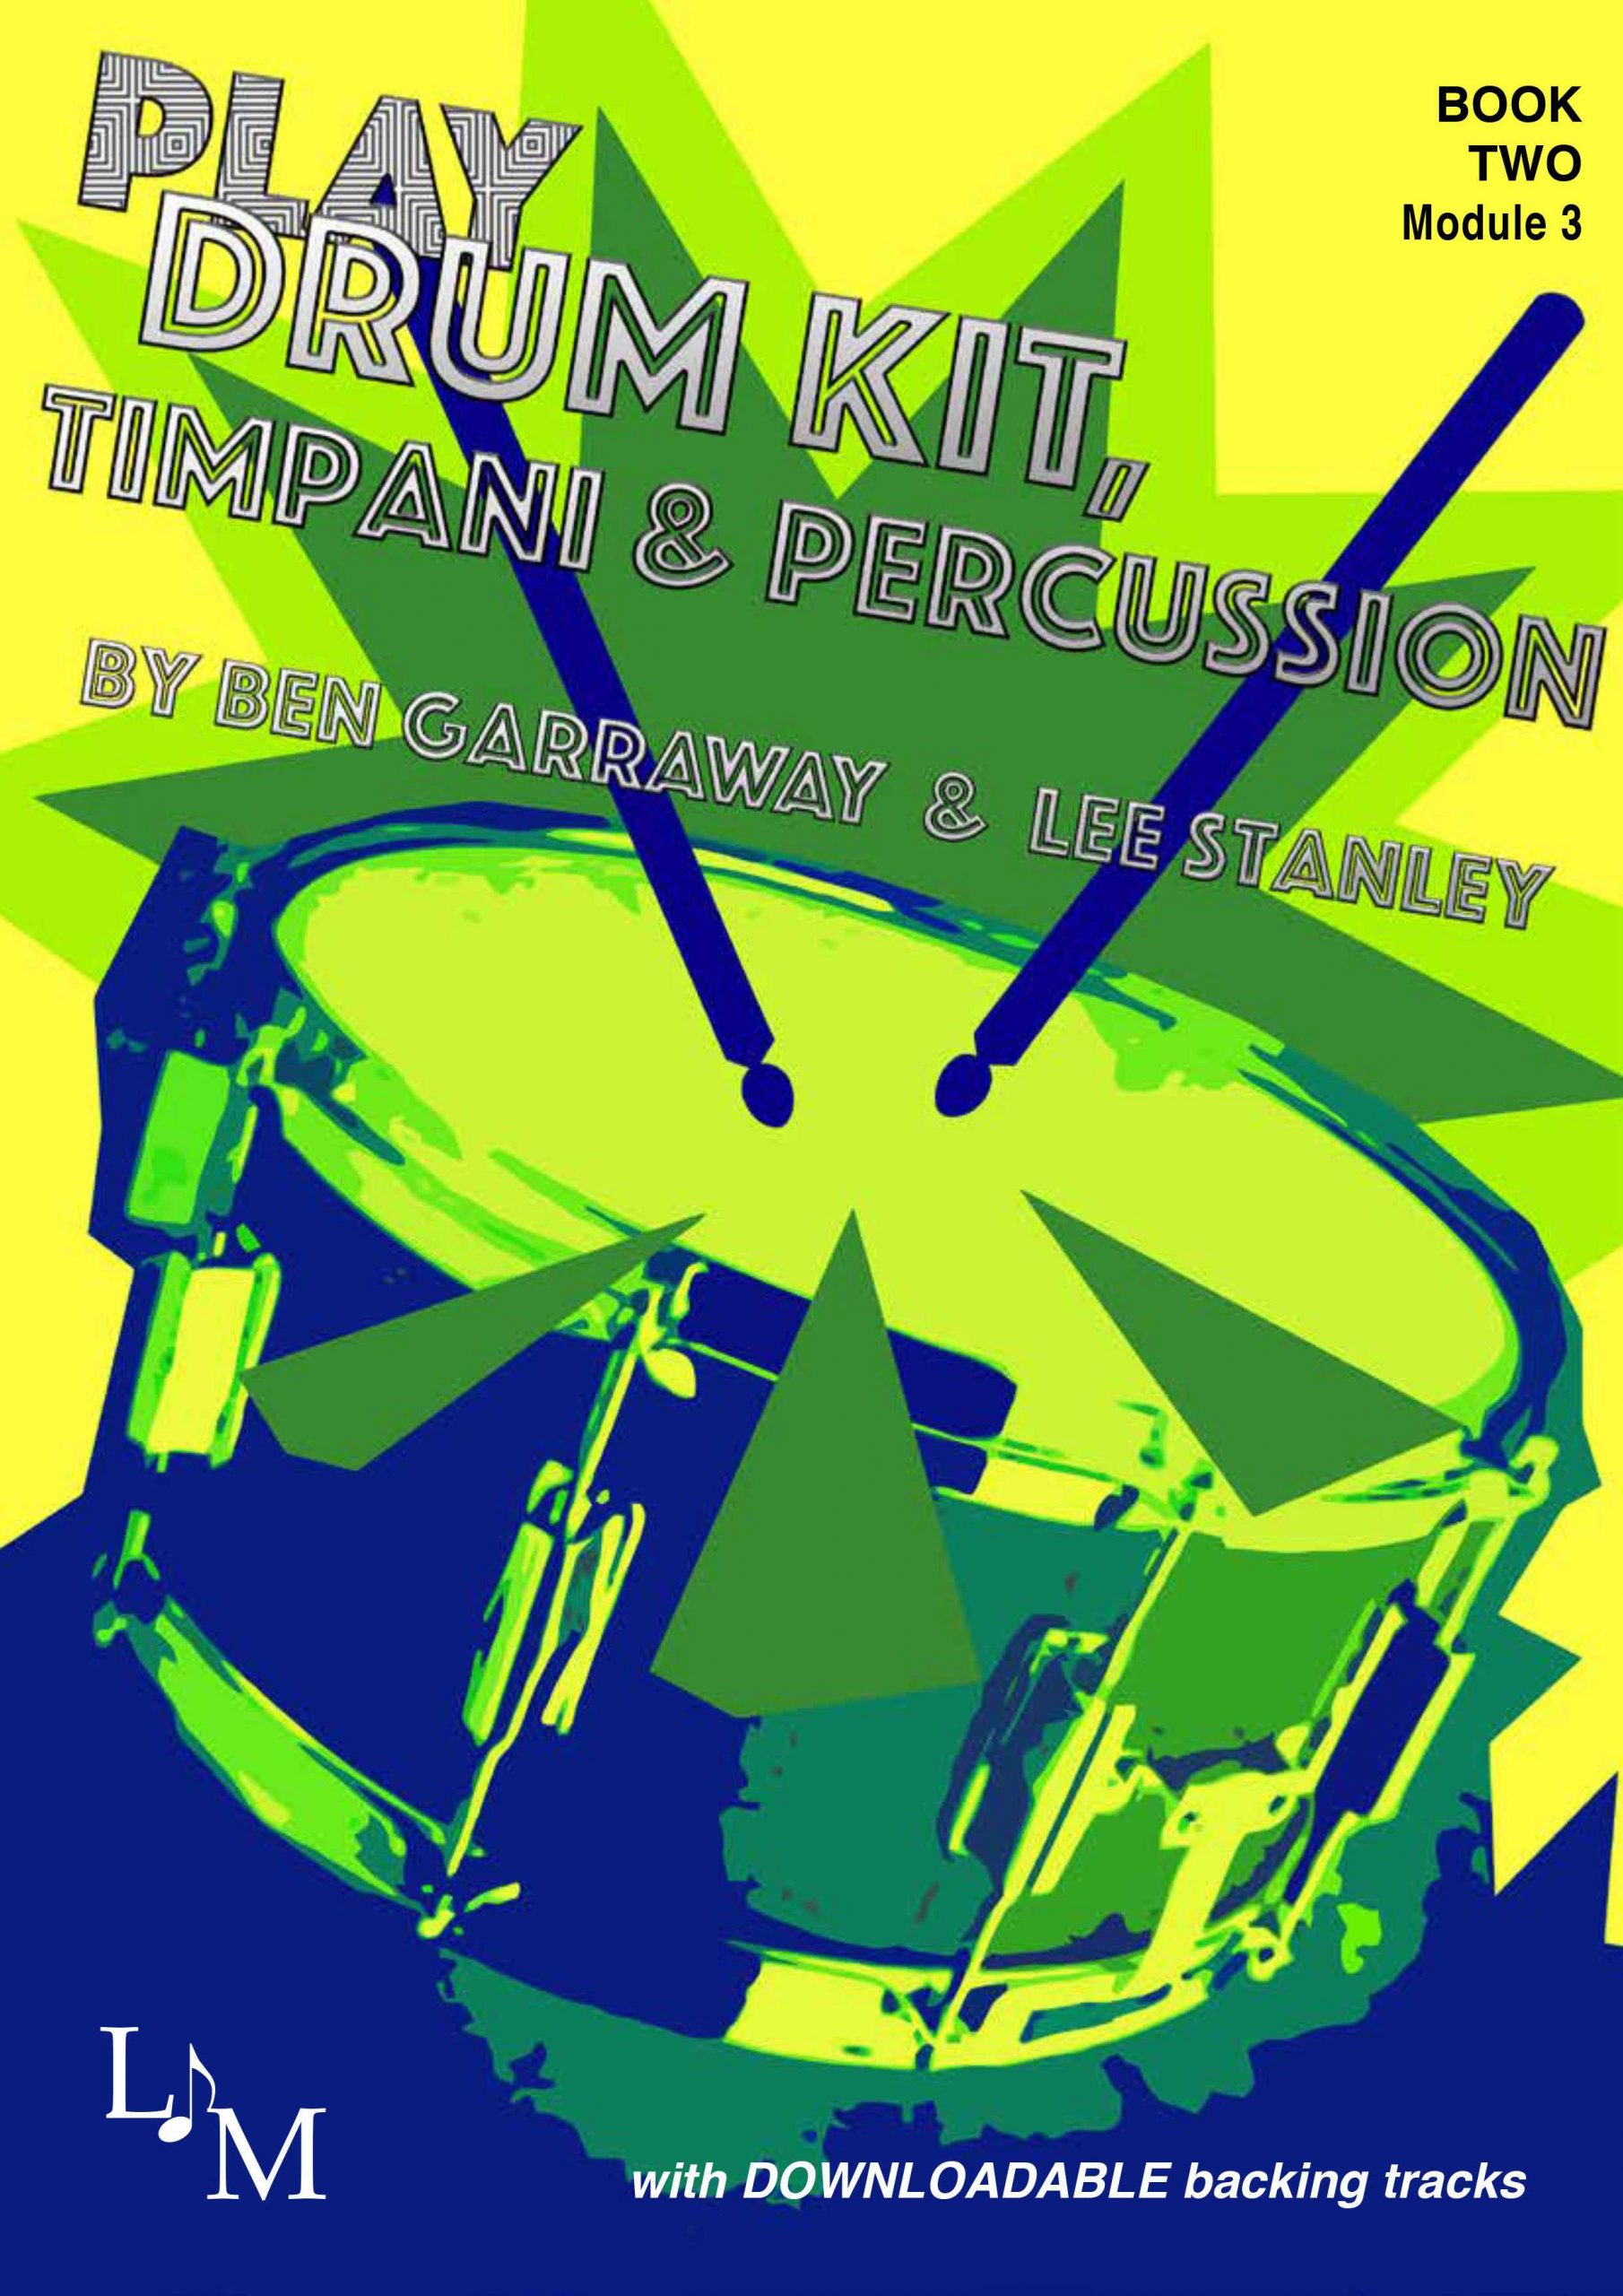 Play Drumkit, Timpani and Percussion - Book 2 by Ben Garraway & Stanley Lee